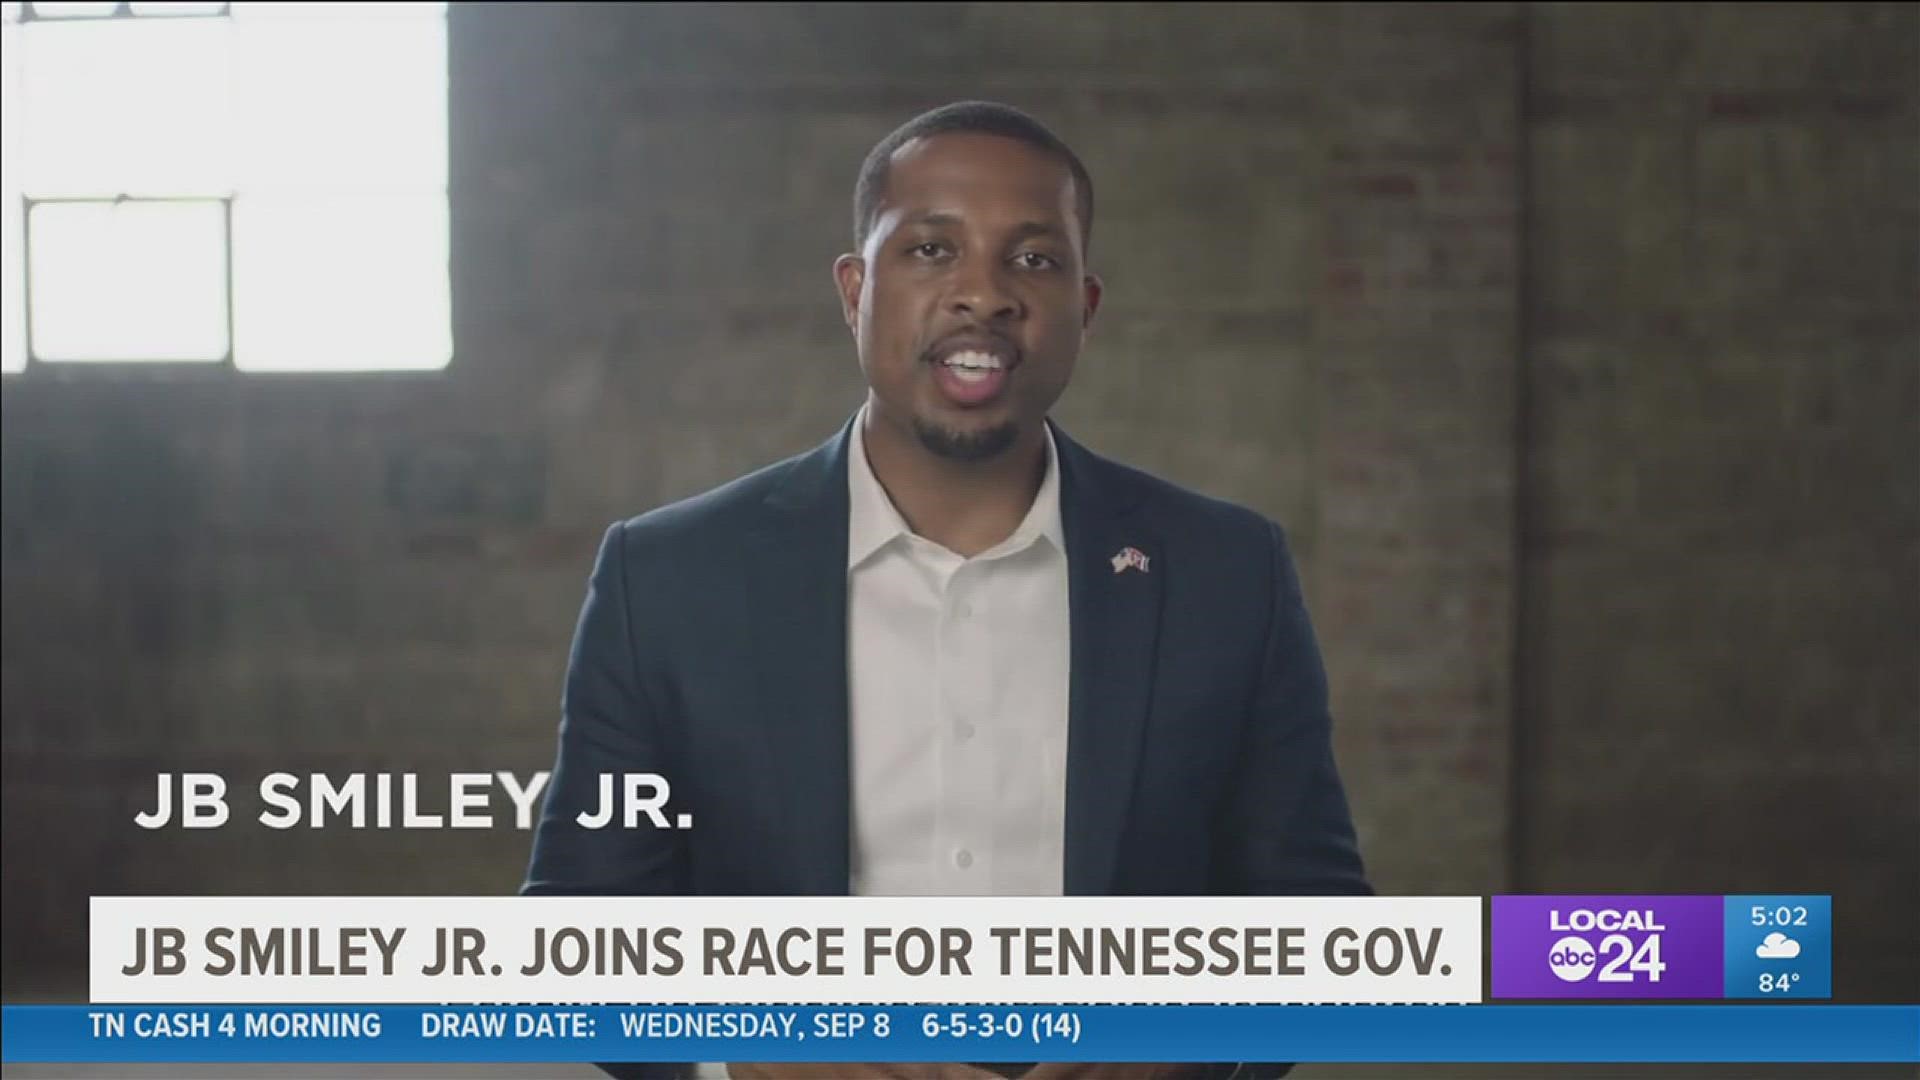 The Tennessee primary for the governor’s race is set for August 2022, with the general election in November 2022.